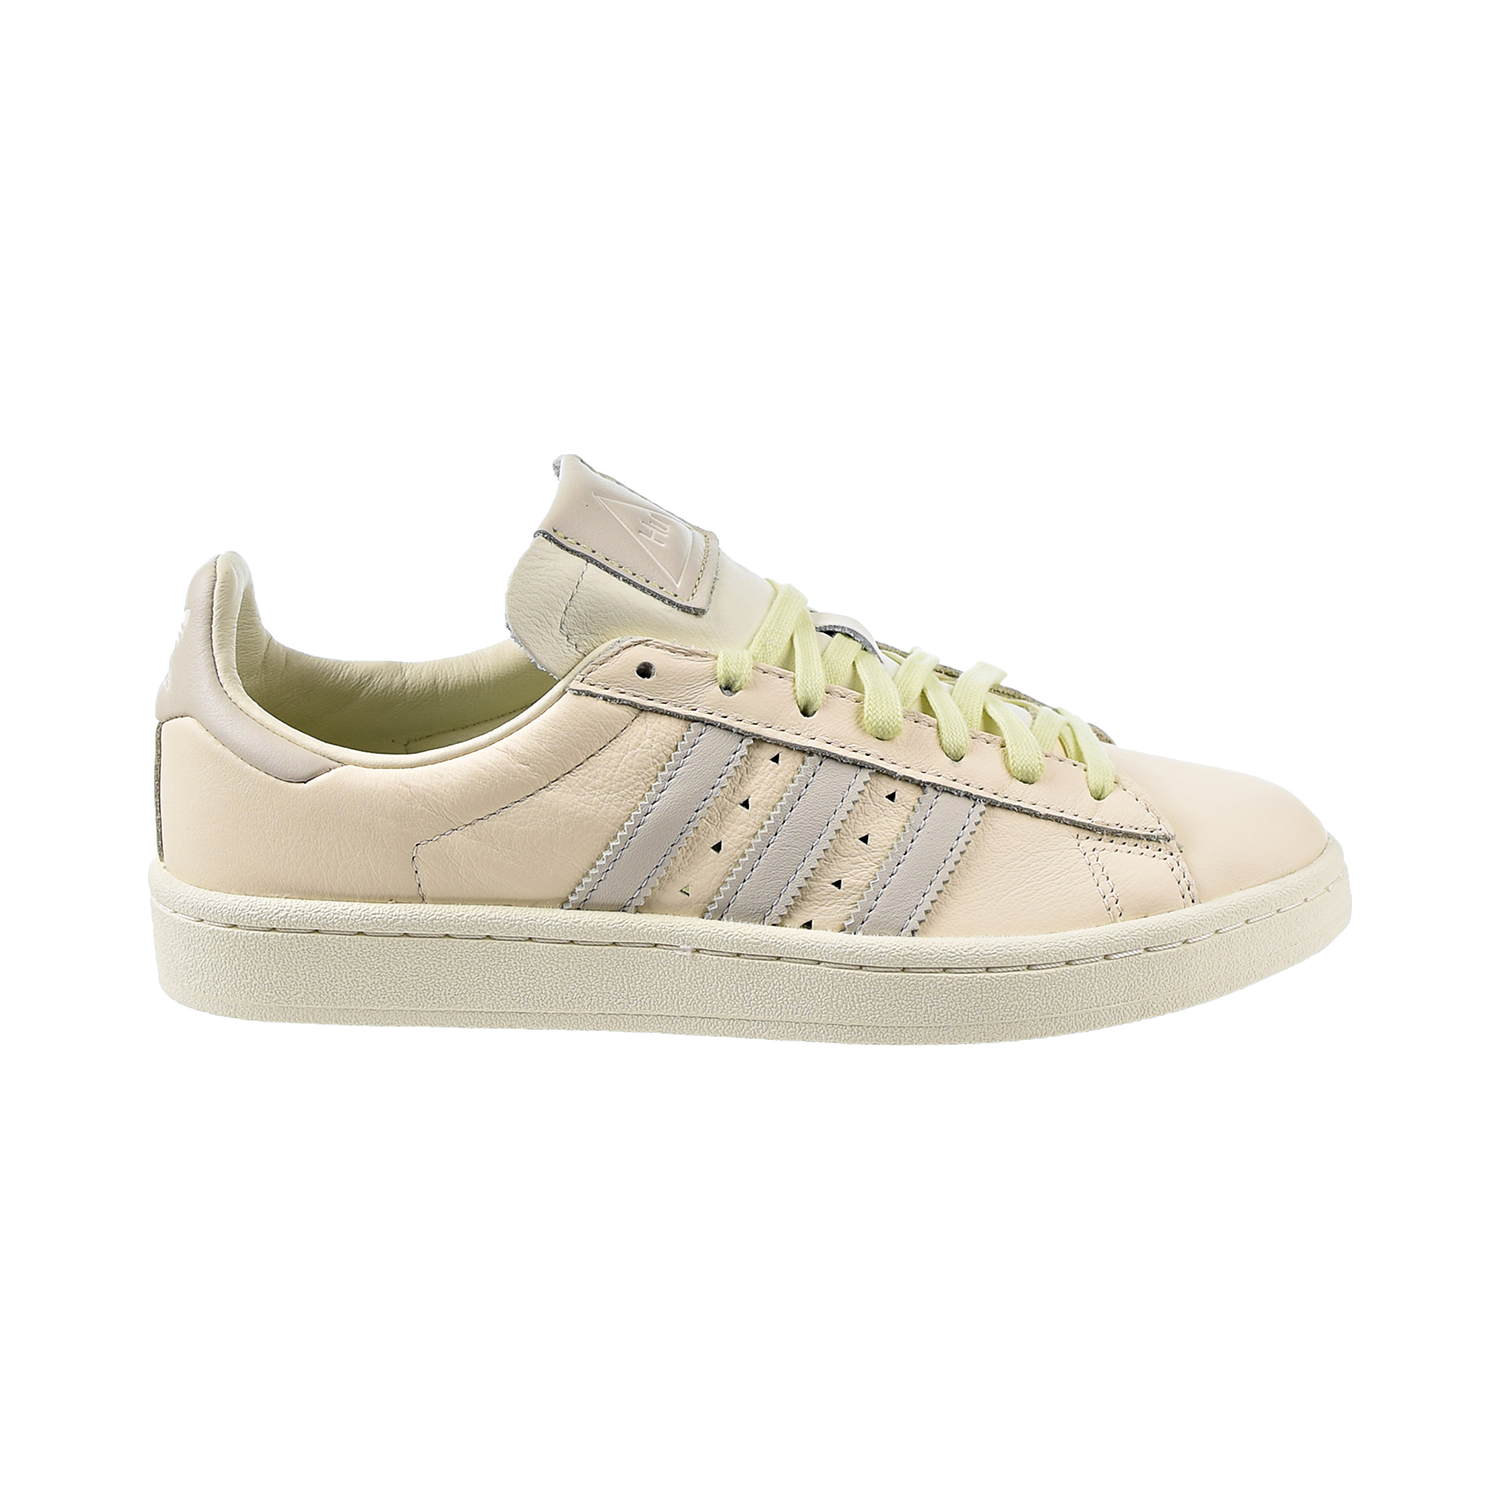 Adidas X Pharrell Williams Campus Shoes Neutral-Bright Yellow